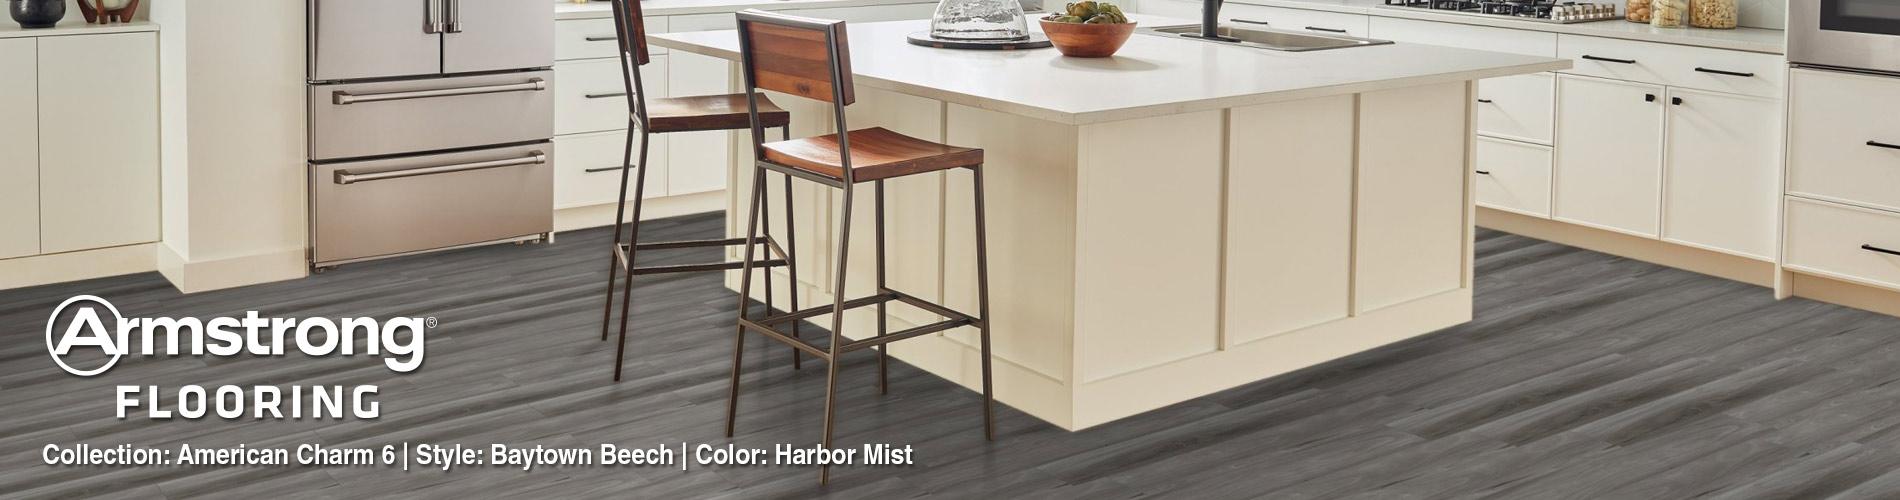 Armstrong Flooring | Style: Baytown Beech | Color: Harbor Mist